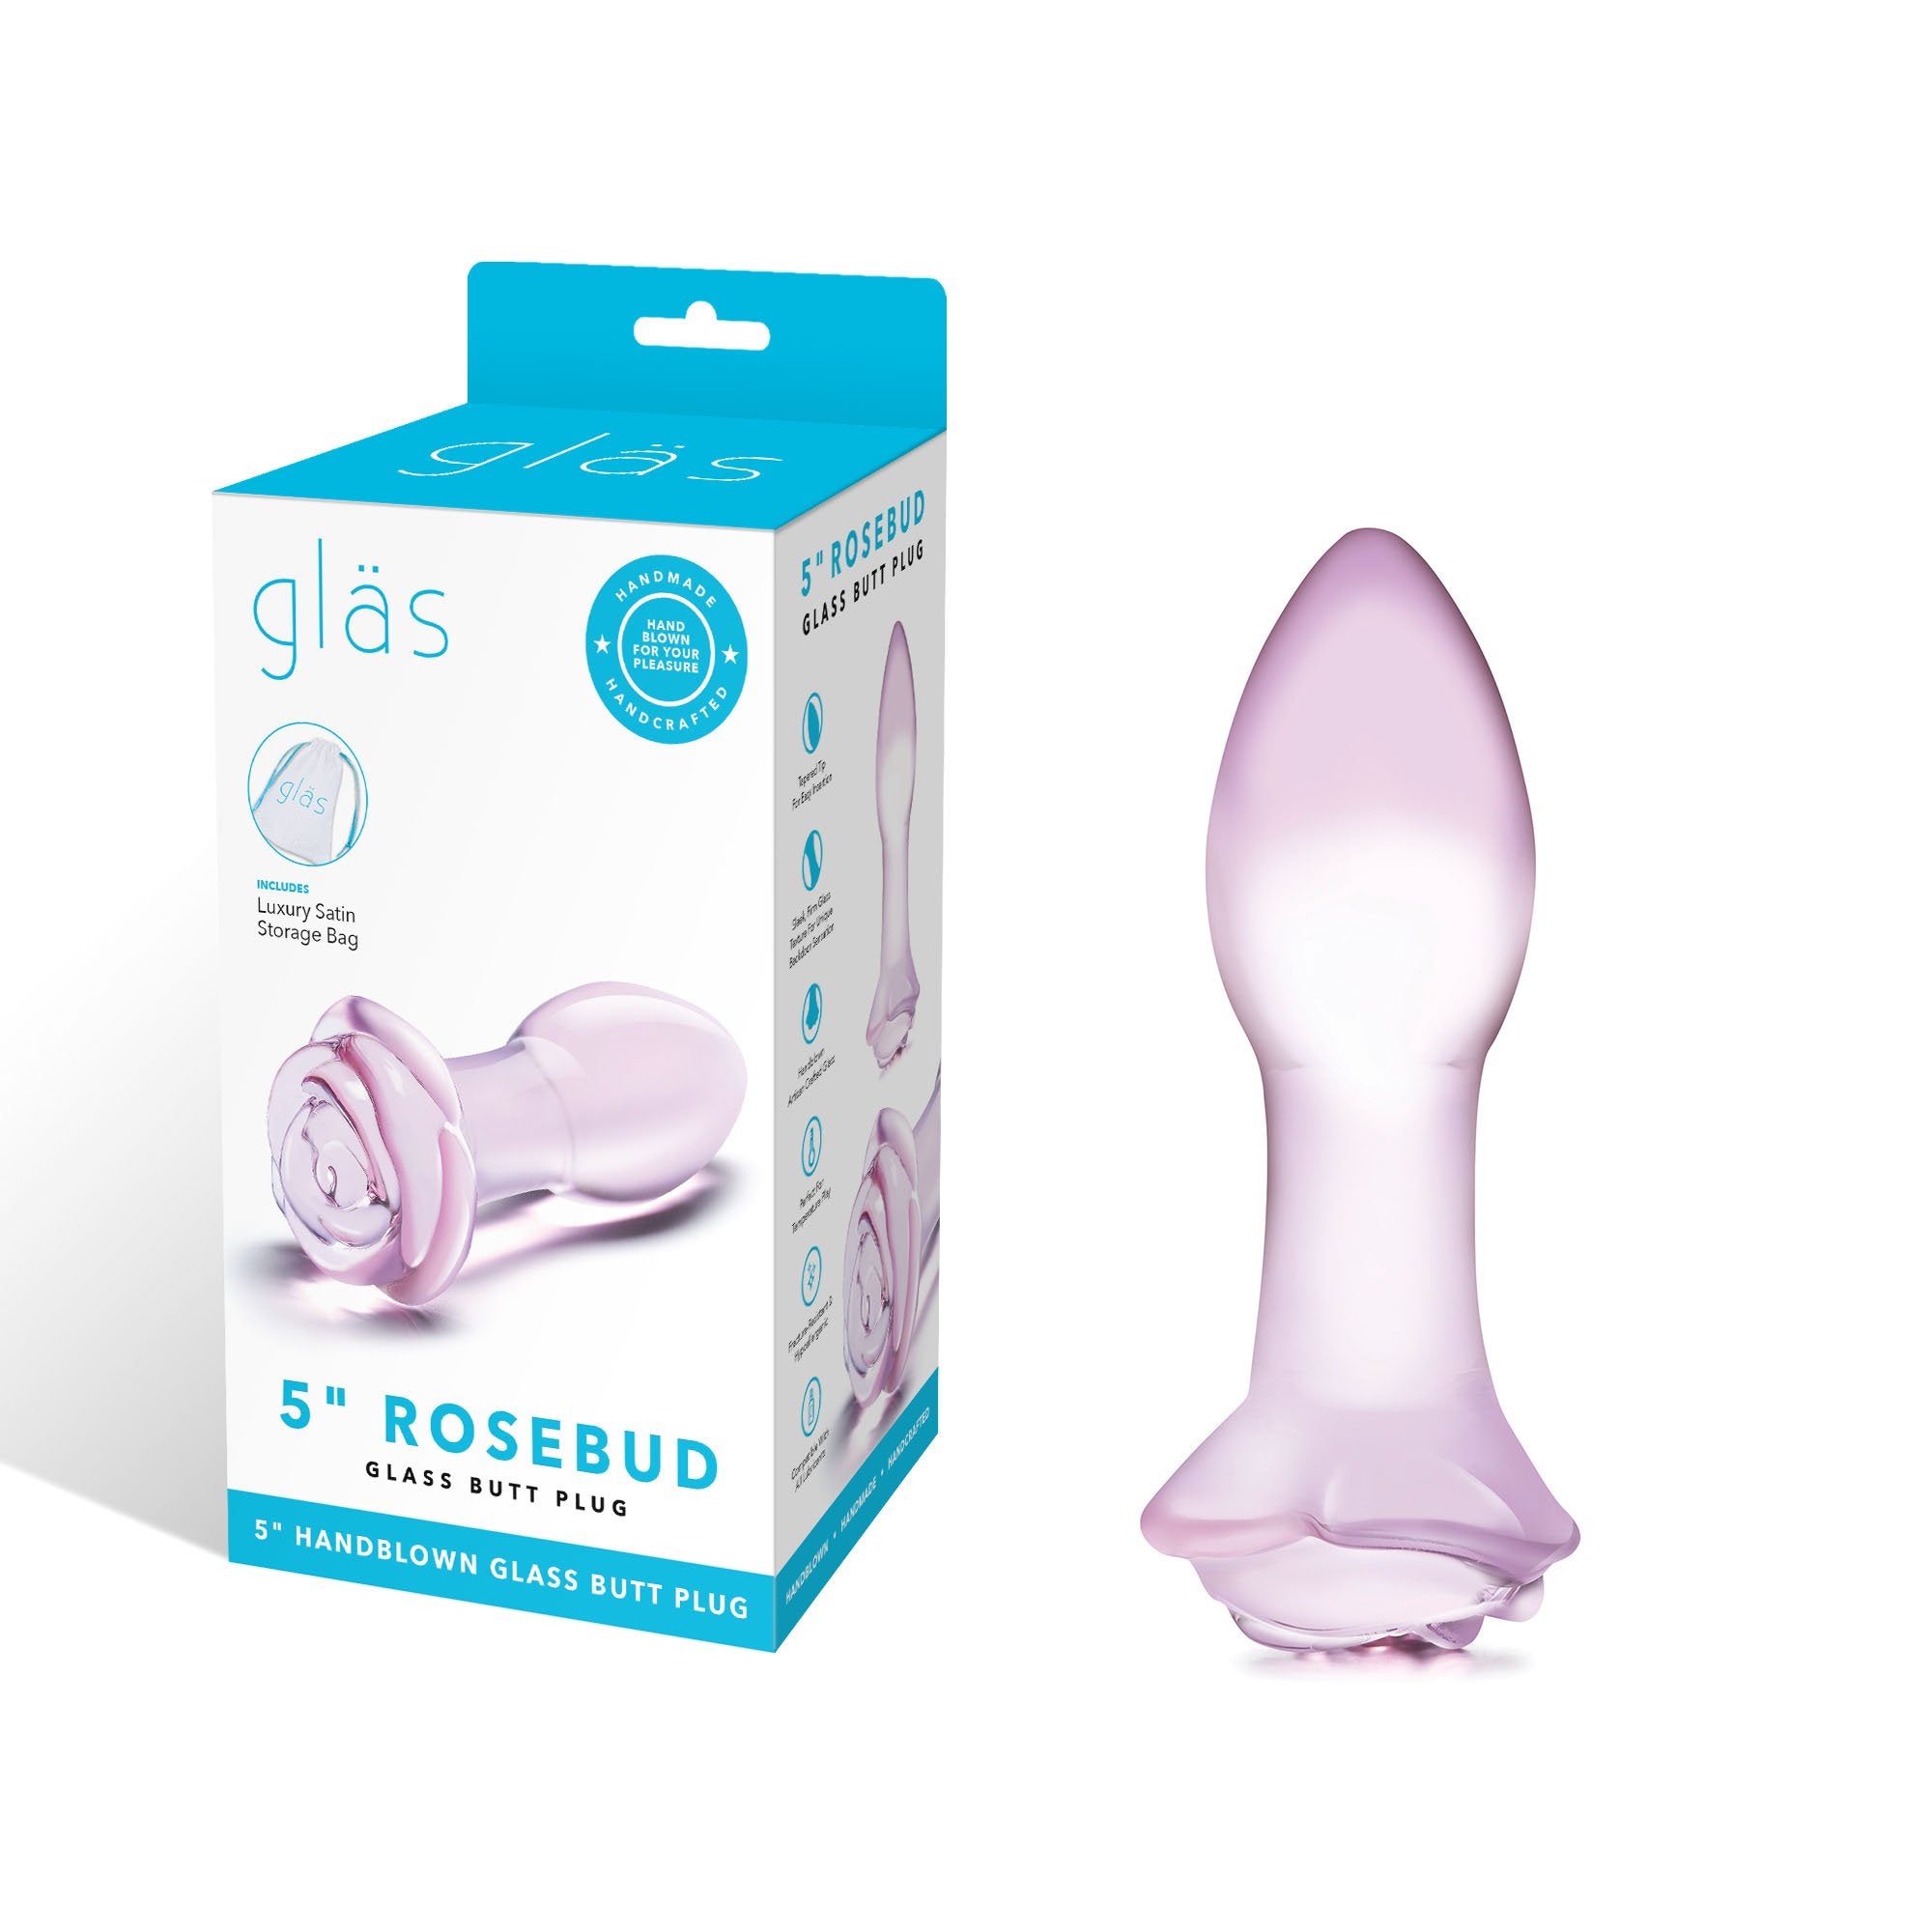 Packaging of the 5 inch Rosebud Glass Butt Plug